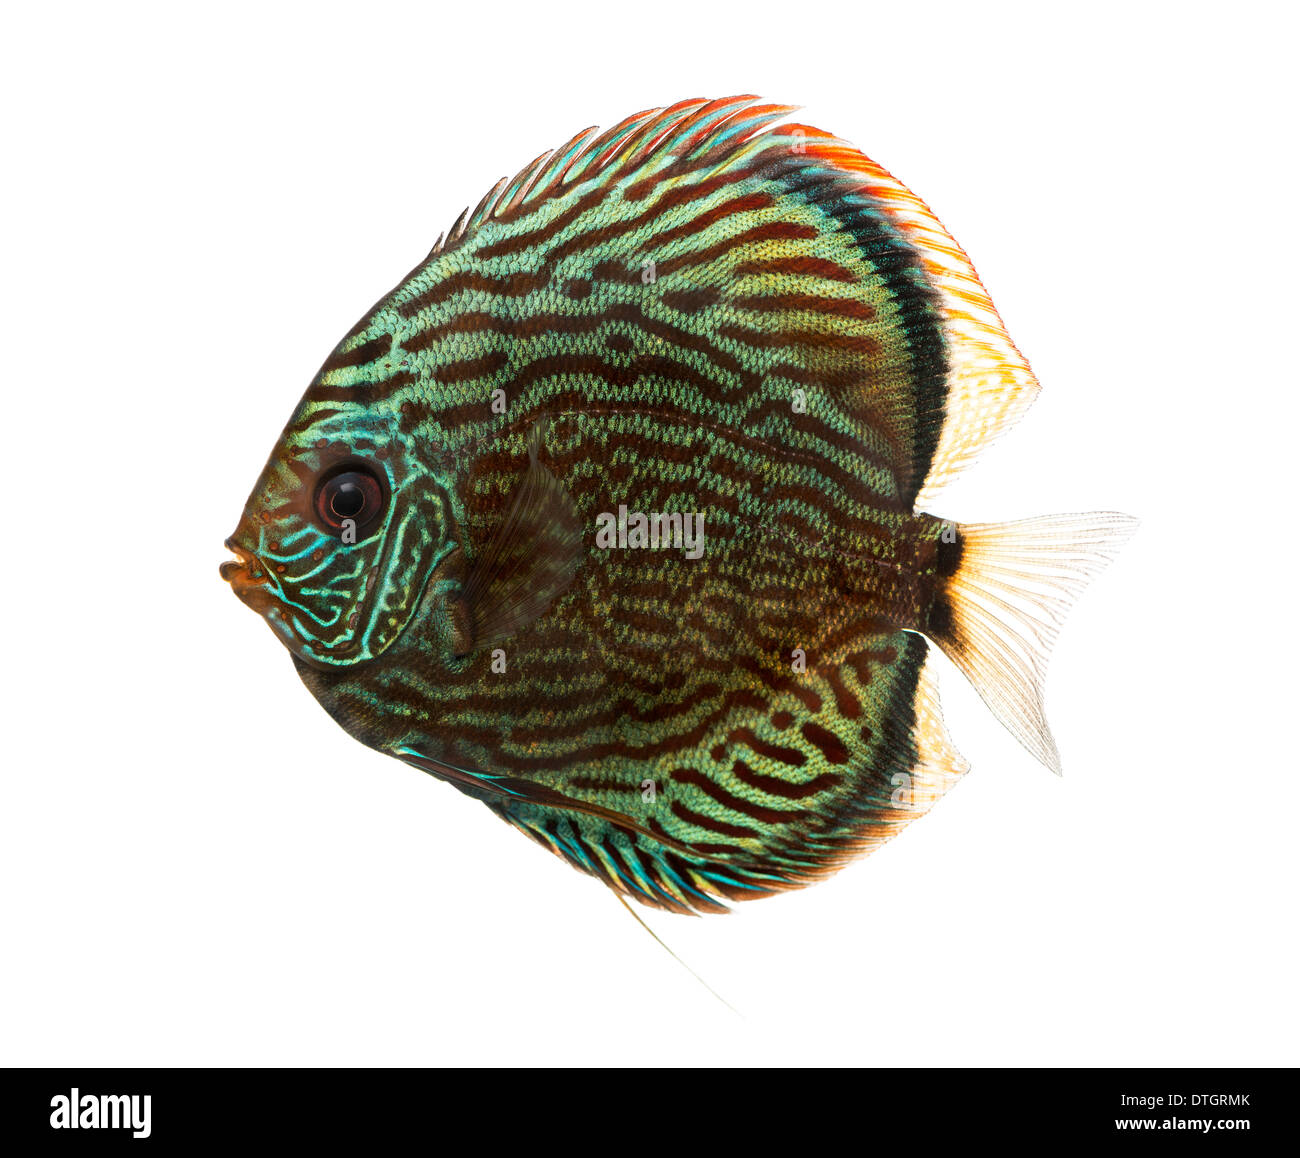 Side view of a Blue snakeskin discus, Symphysodon aequifasciatus, against white background Stock Photo